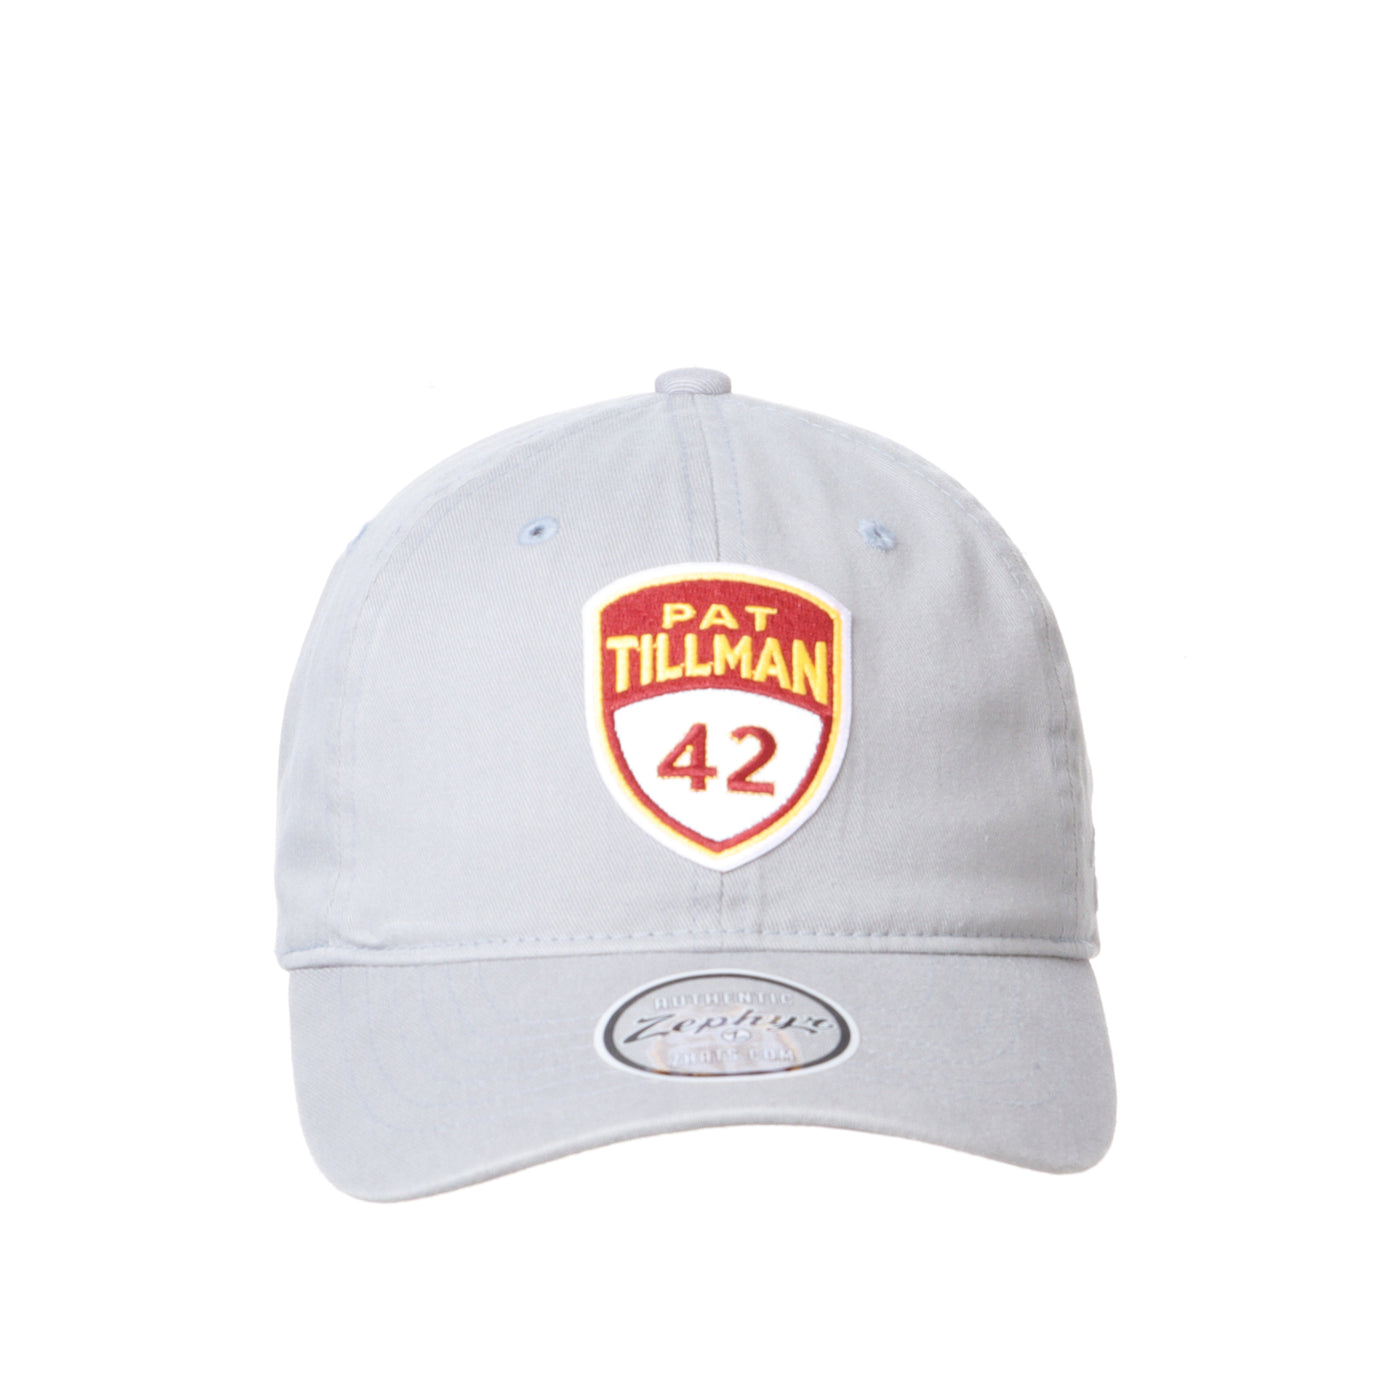 Shows the front of a light gray hat with a Pat Tillman shield on the front with a 42.